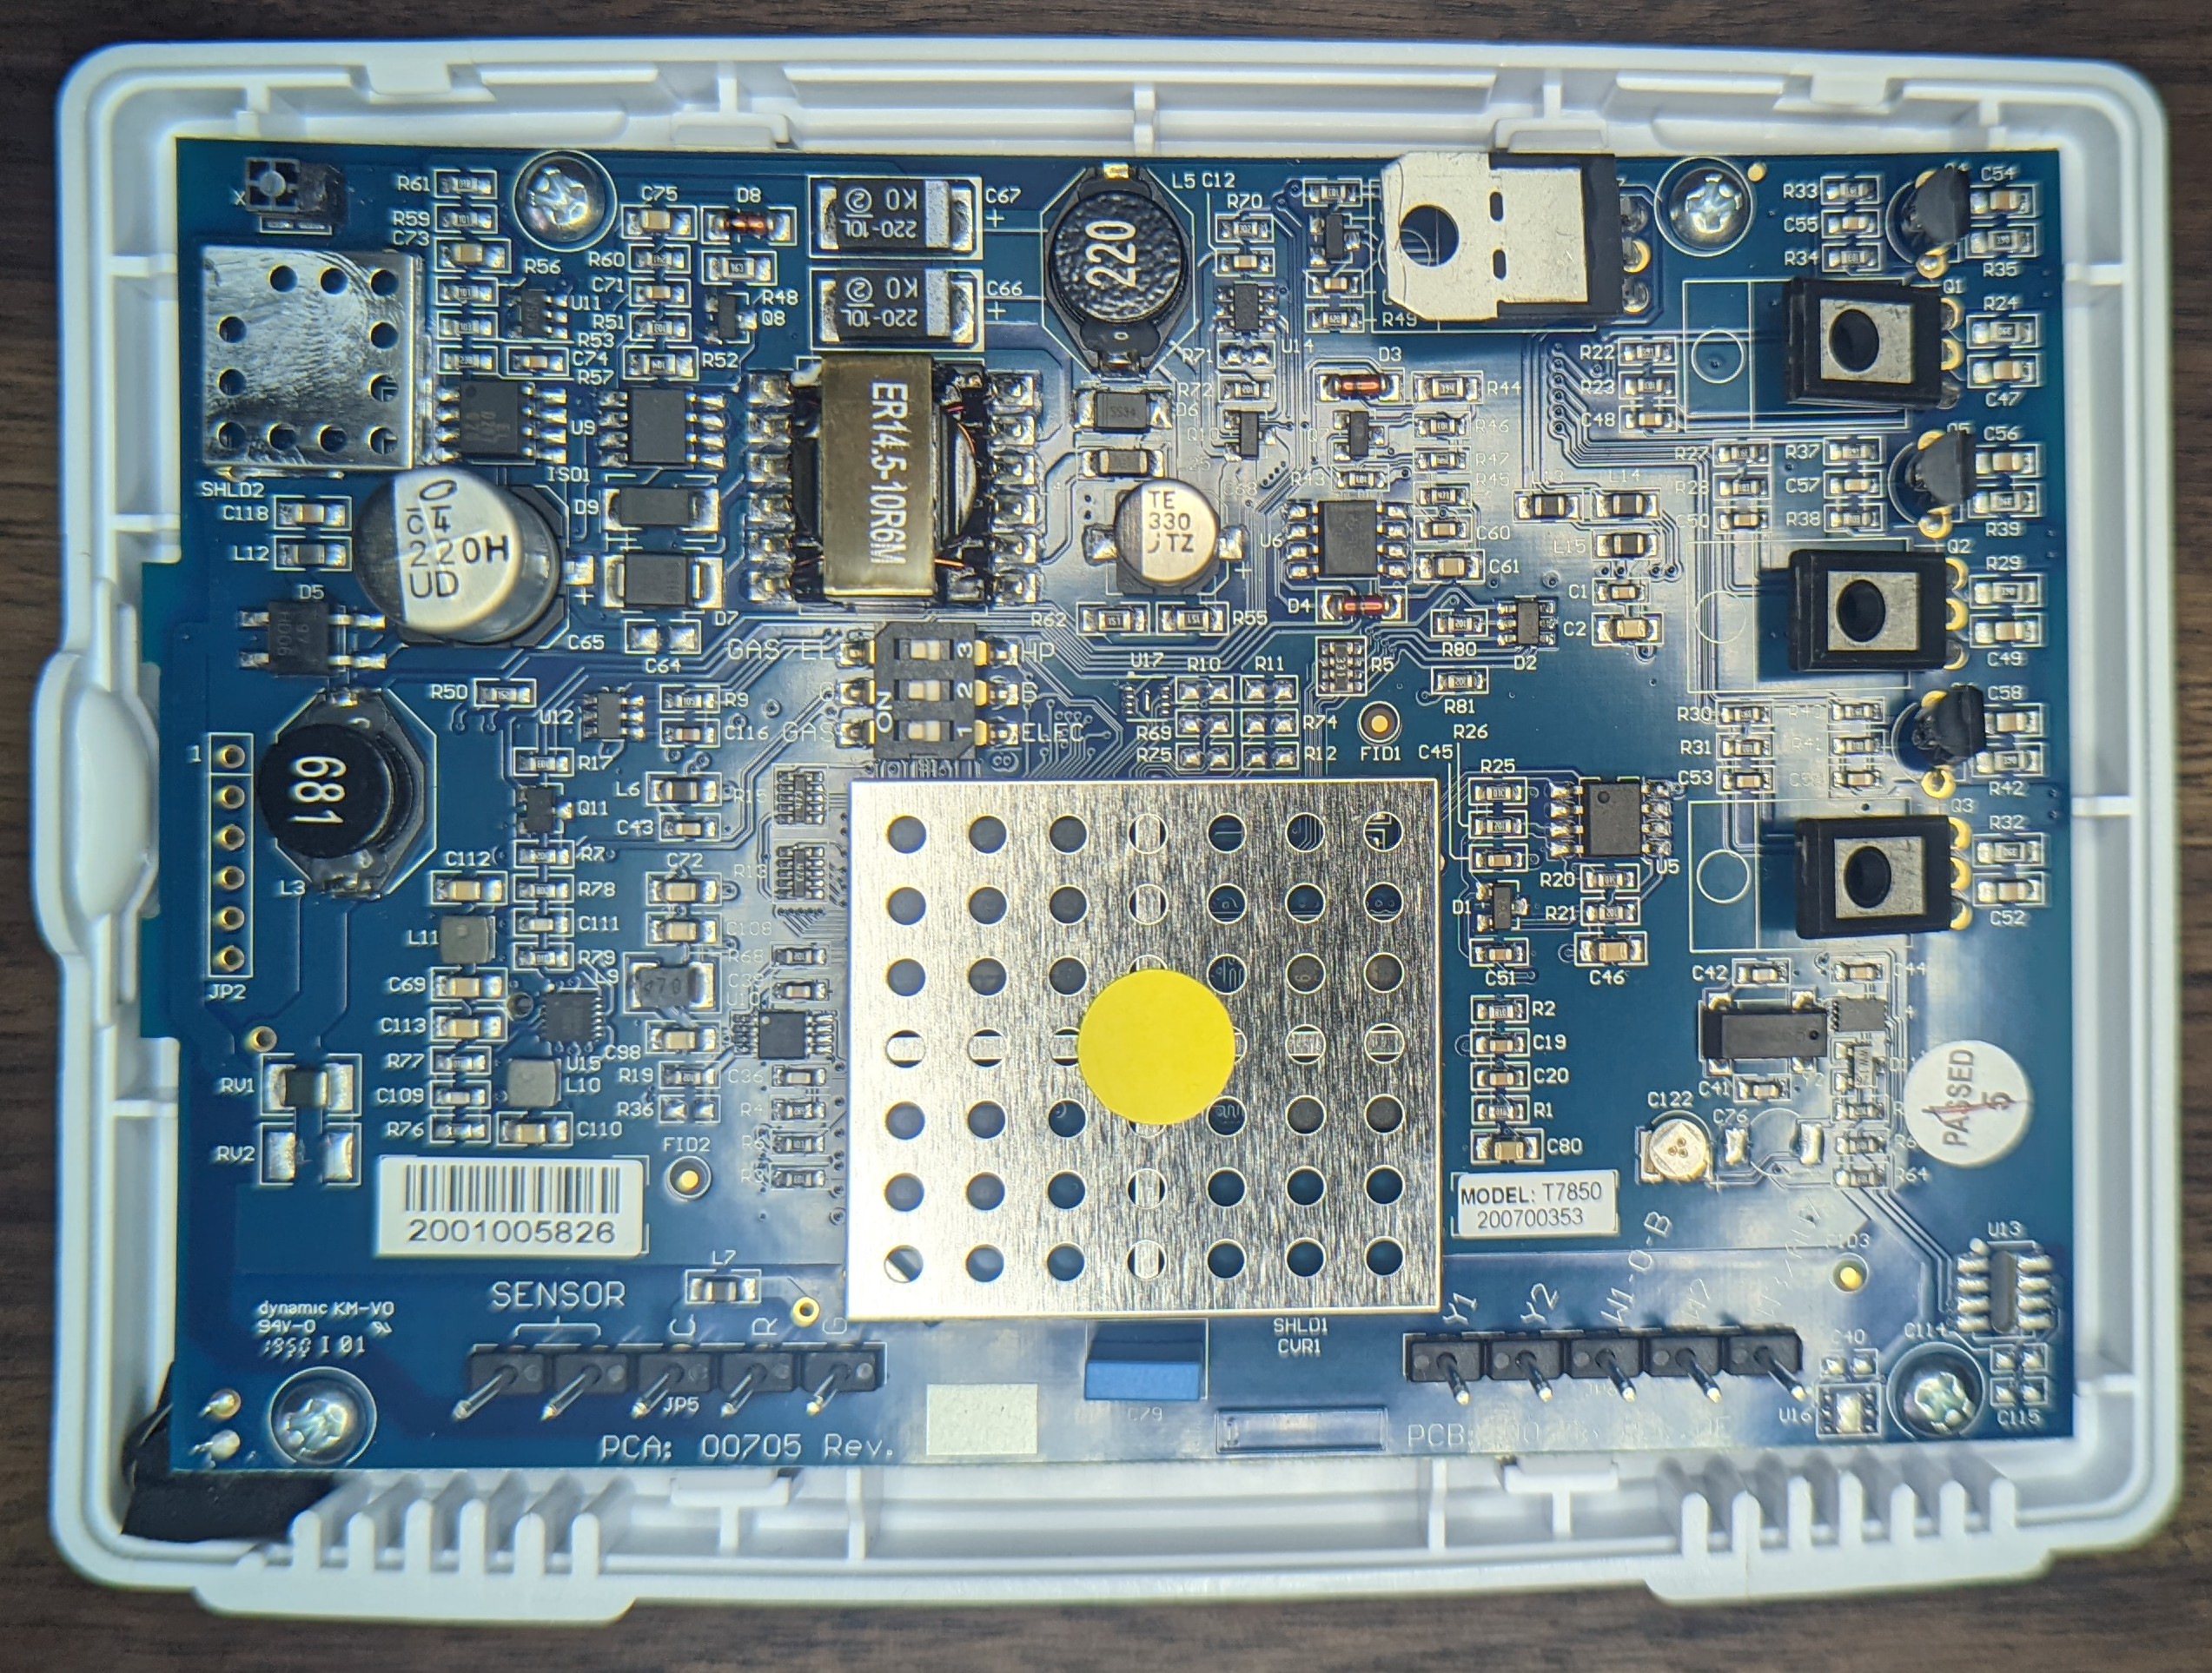 Picture showing the main PCB of the thermostat